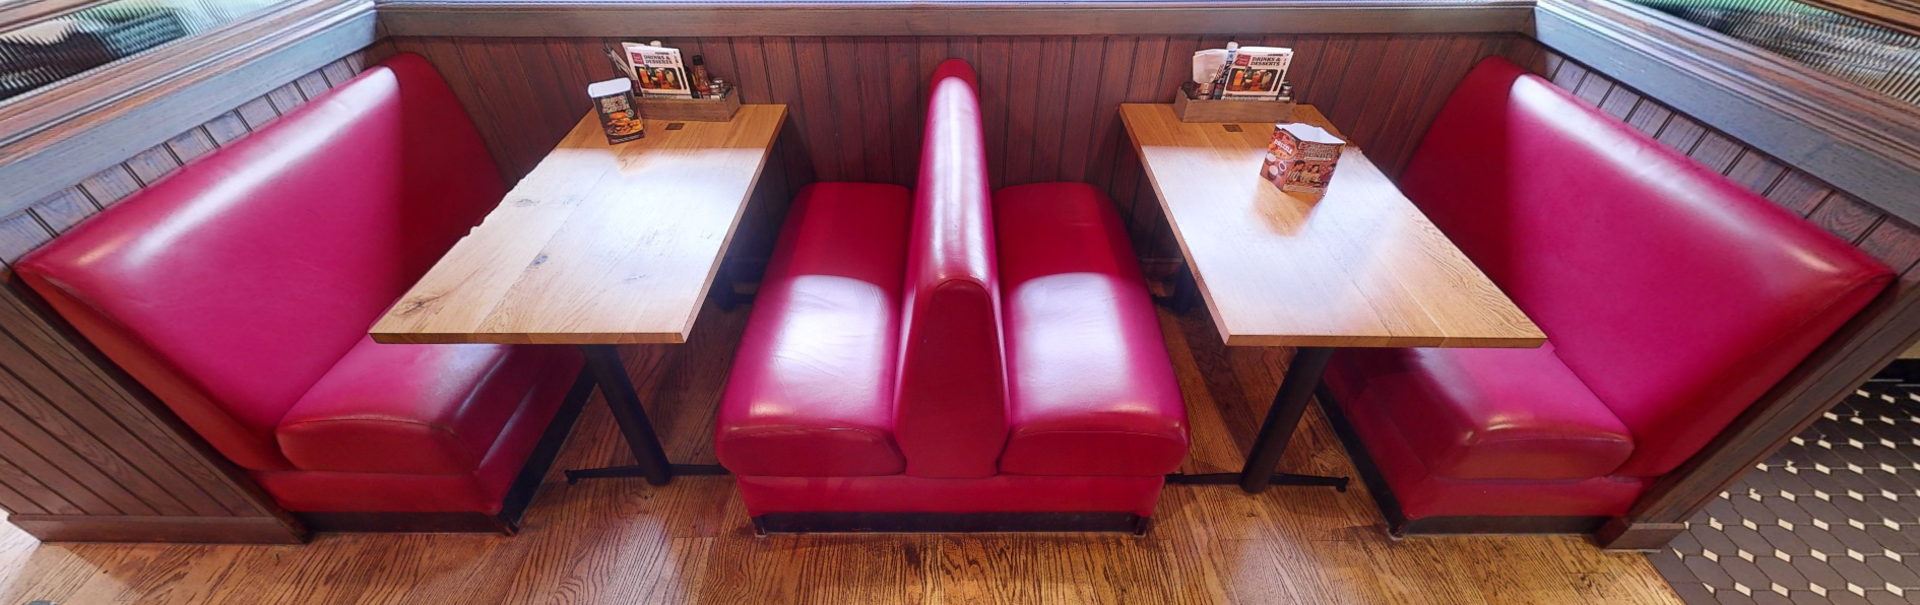 1 x Collection of Restaurant Booth Seating in a Red Faux Leather Upholstery - Image 4 of 8